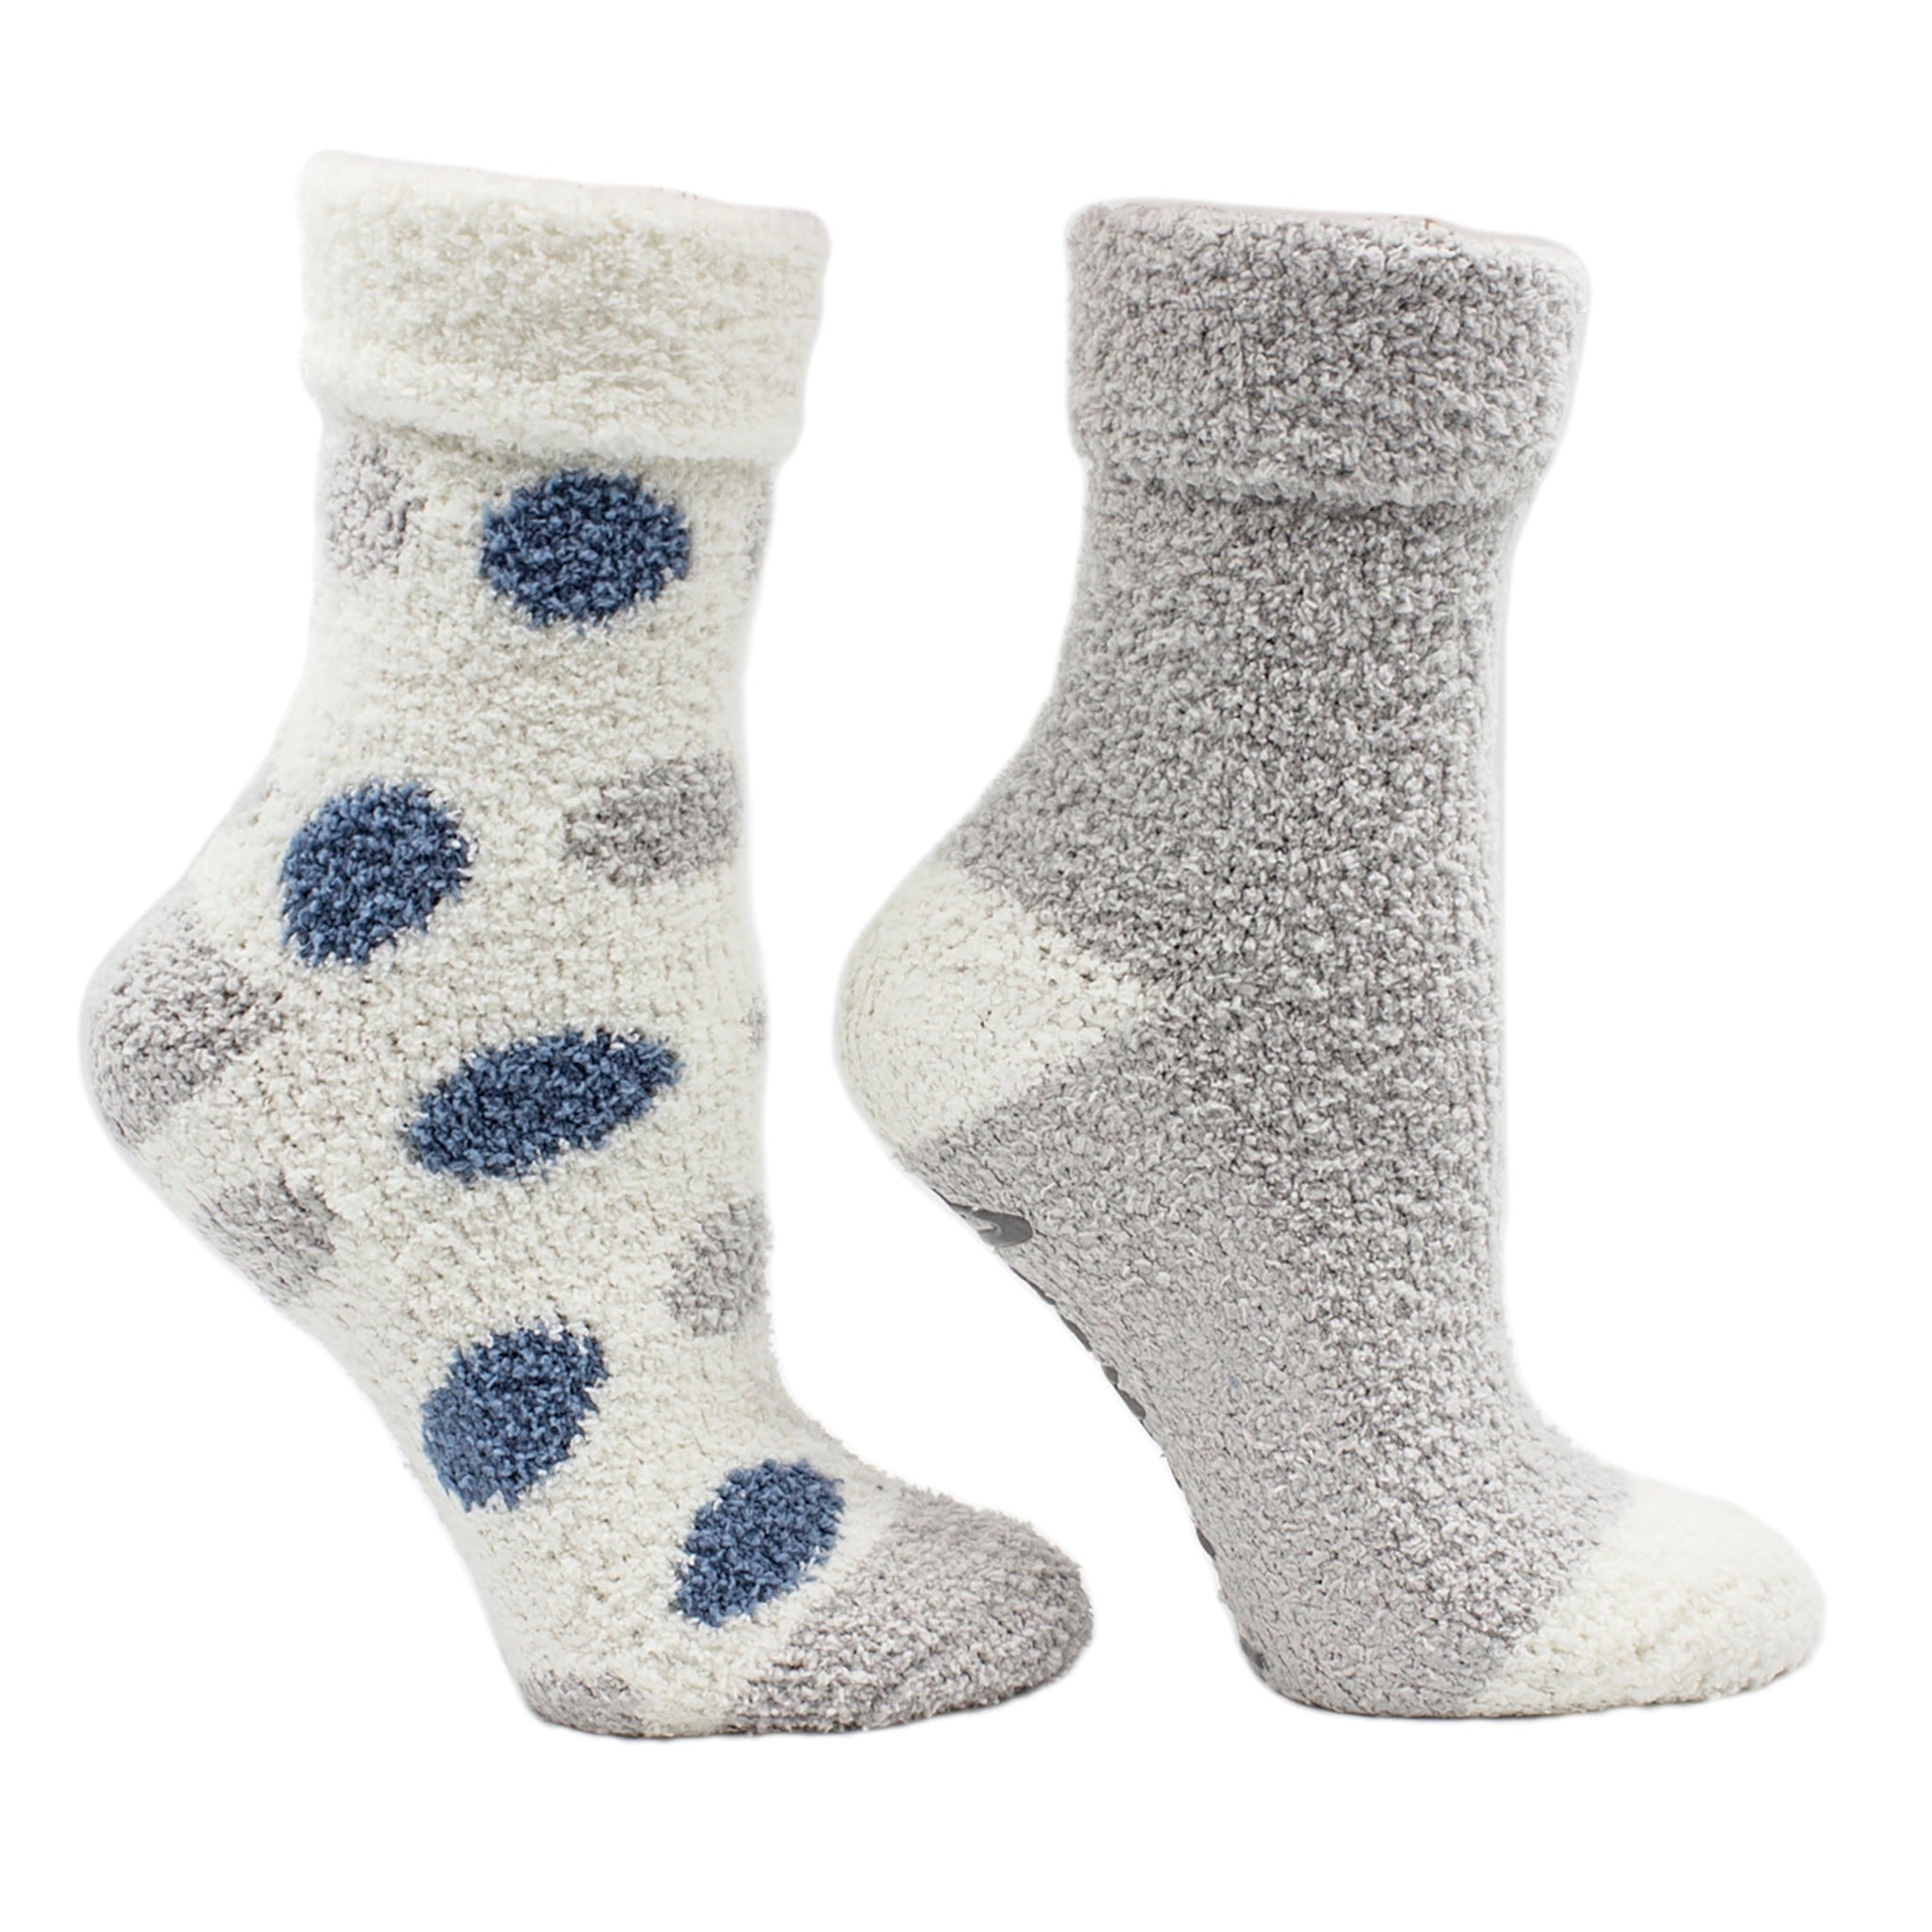 2 Pairs - Non-Skid Soft Fuzzy Eucalyptus Mint and Shea Butter Infused Slipper Socks with Sachet Gift